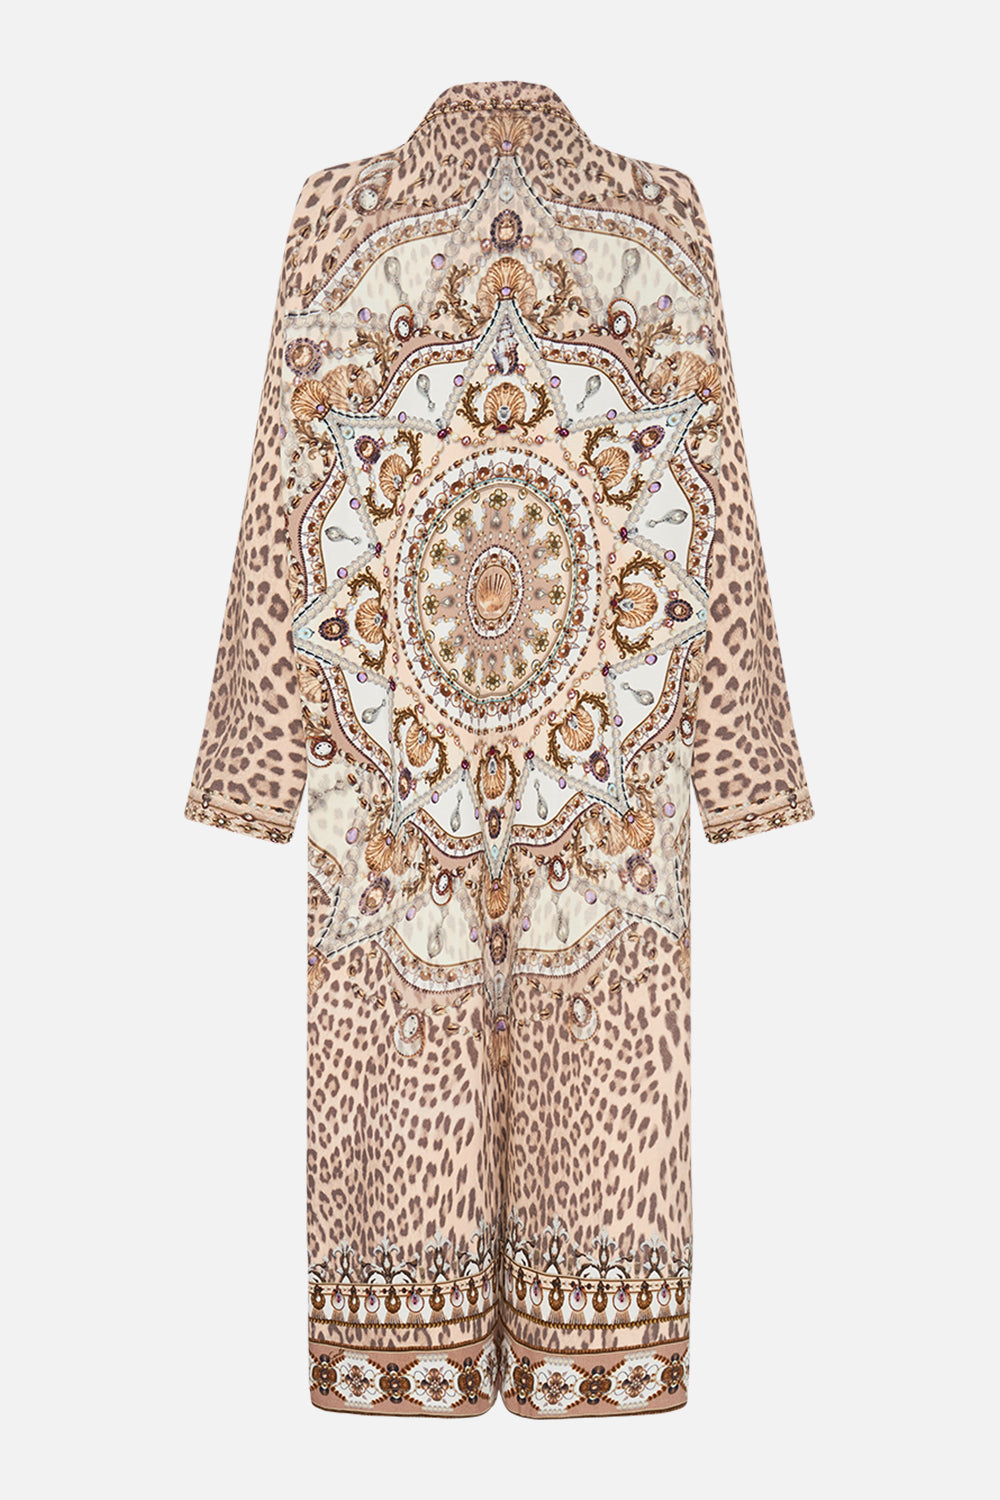 CAMILLA printed trench coat in Grotto Goddess print